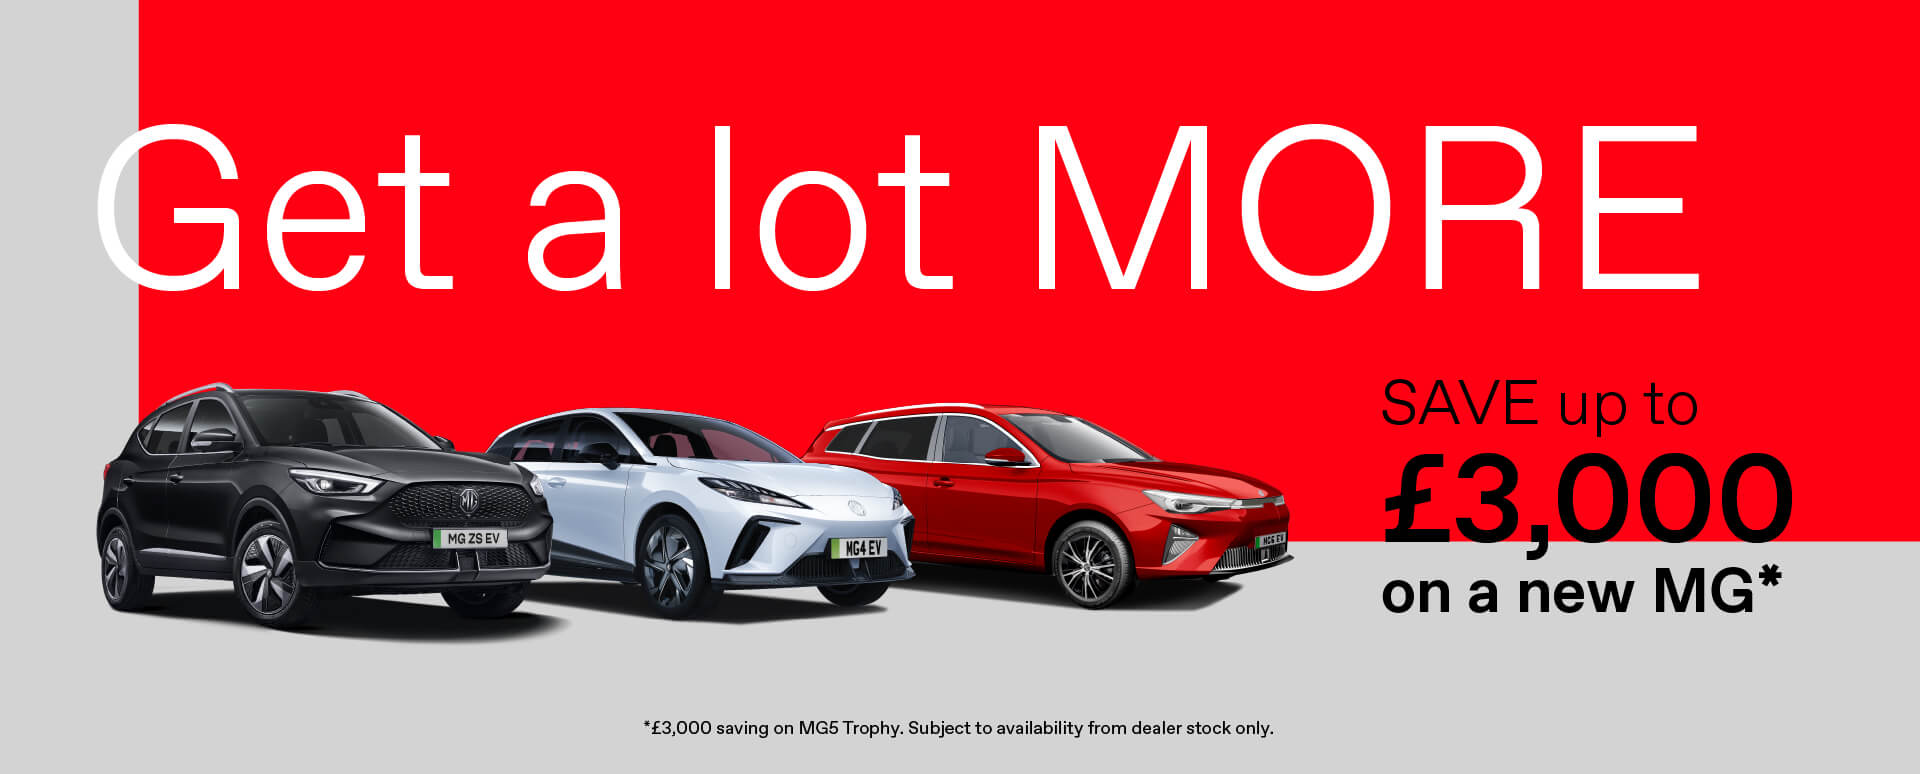 Save up to £3,000* on a new MG